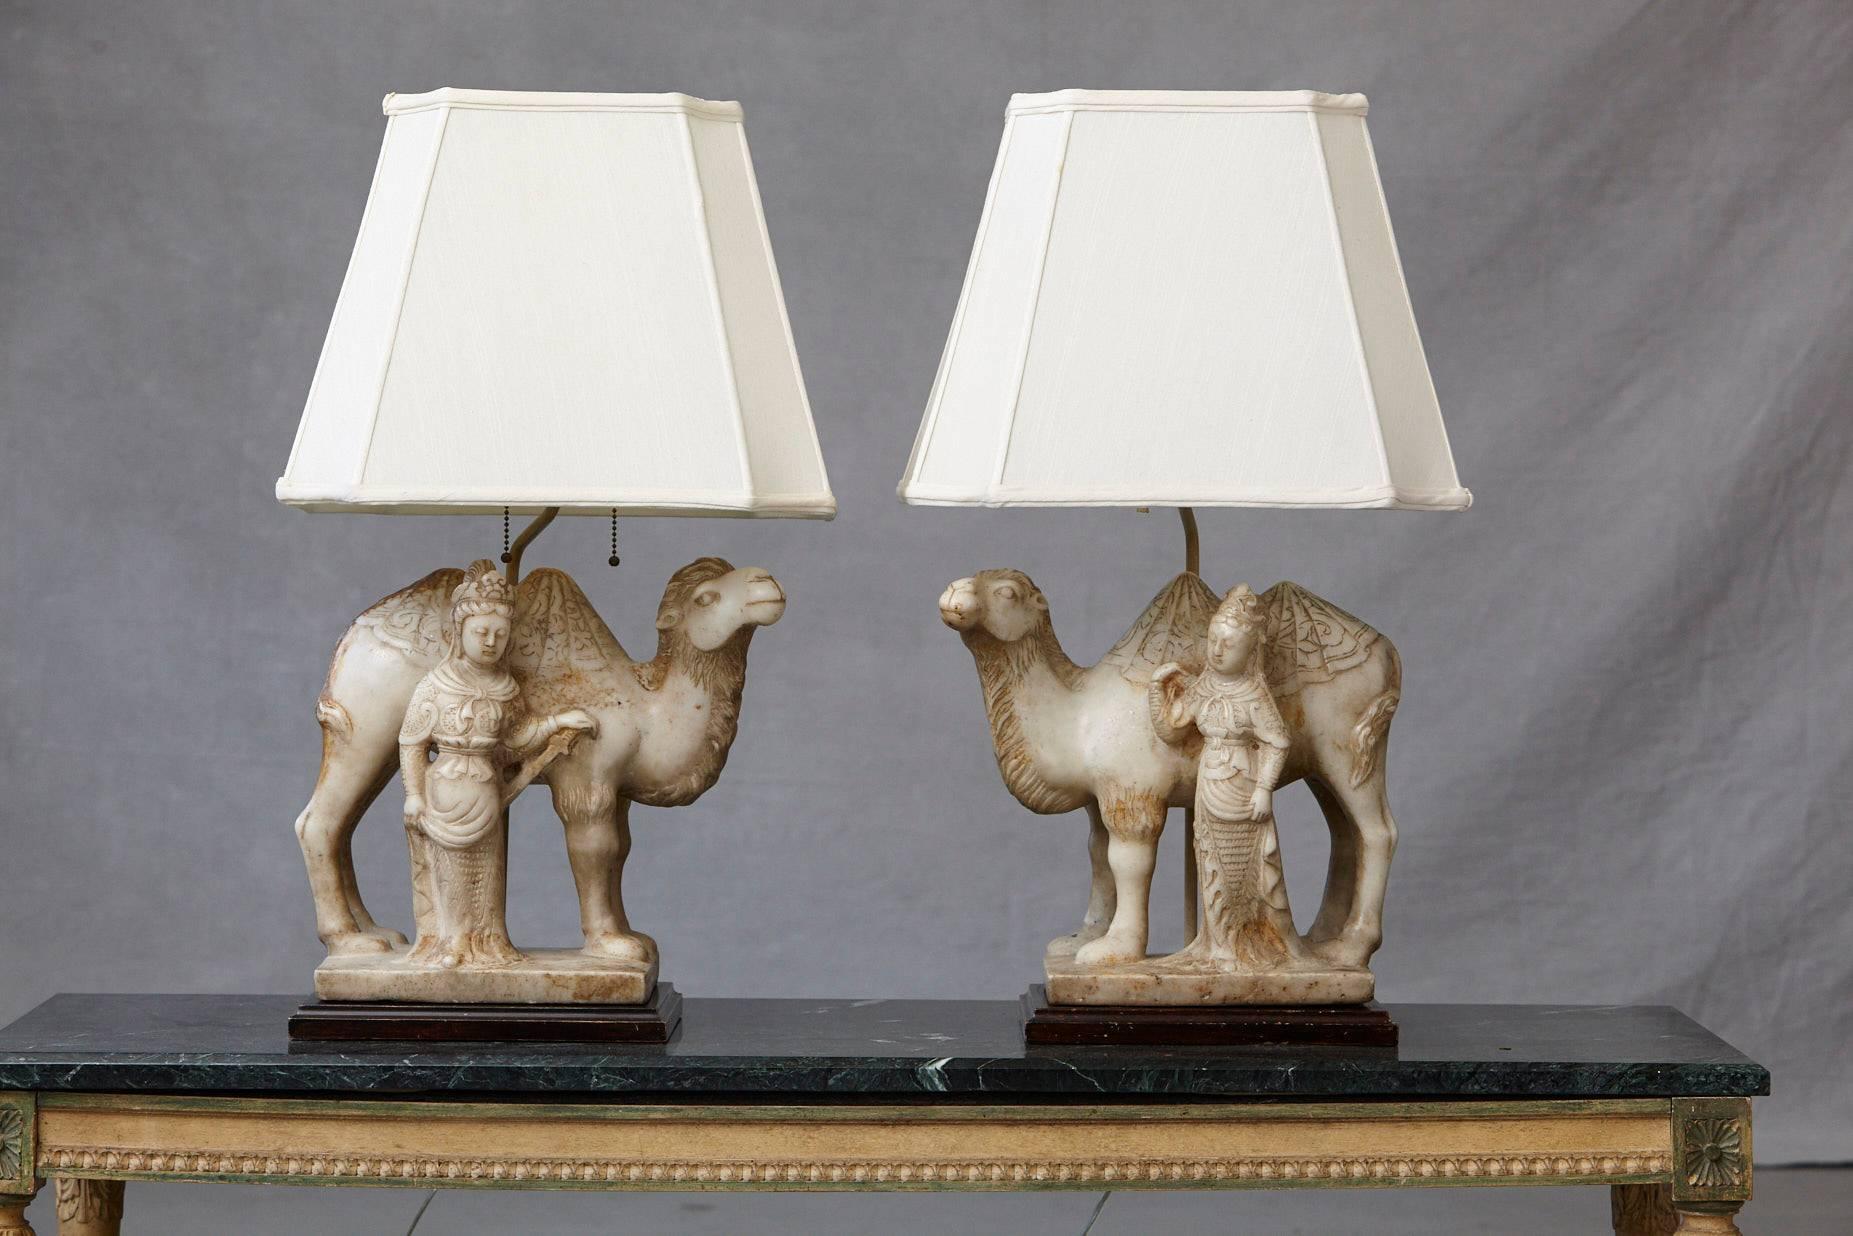 Impressive pair of detailed hand-carved figurative marble table lamps depicting each an Asian woman in front of a dromedar facing each other, raised on rosewood bases, with custom-made height adjustable rectangular silk shades.

The inner lining